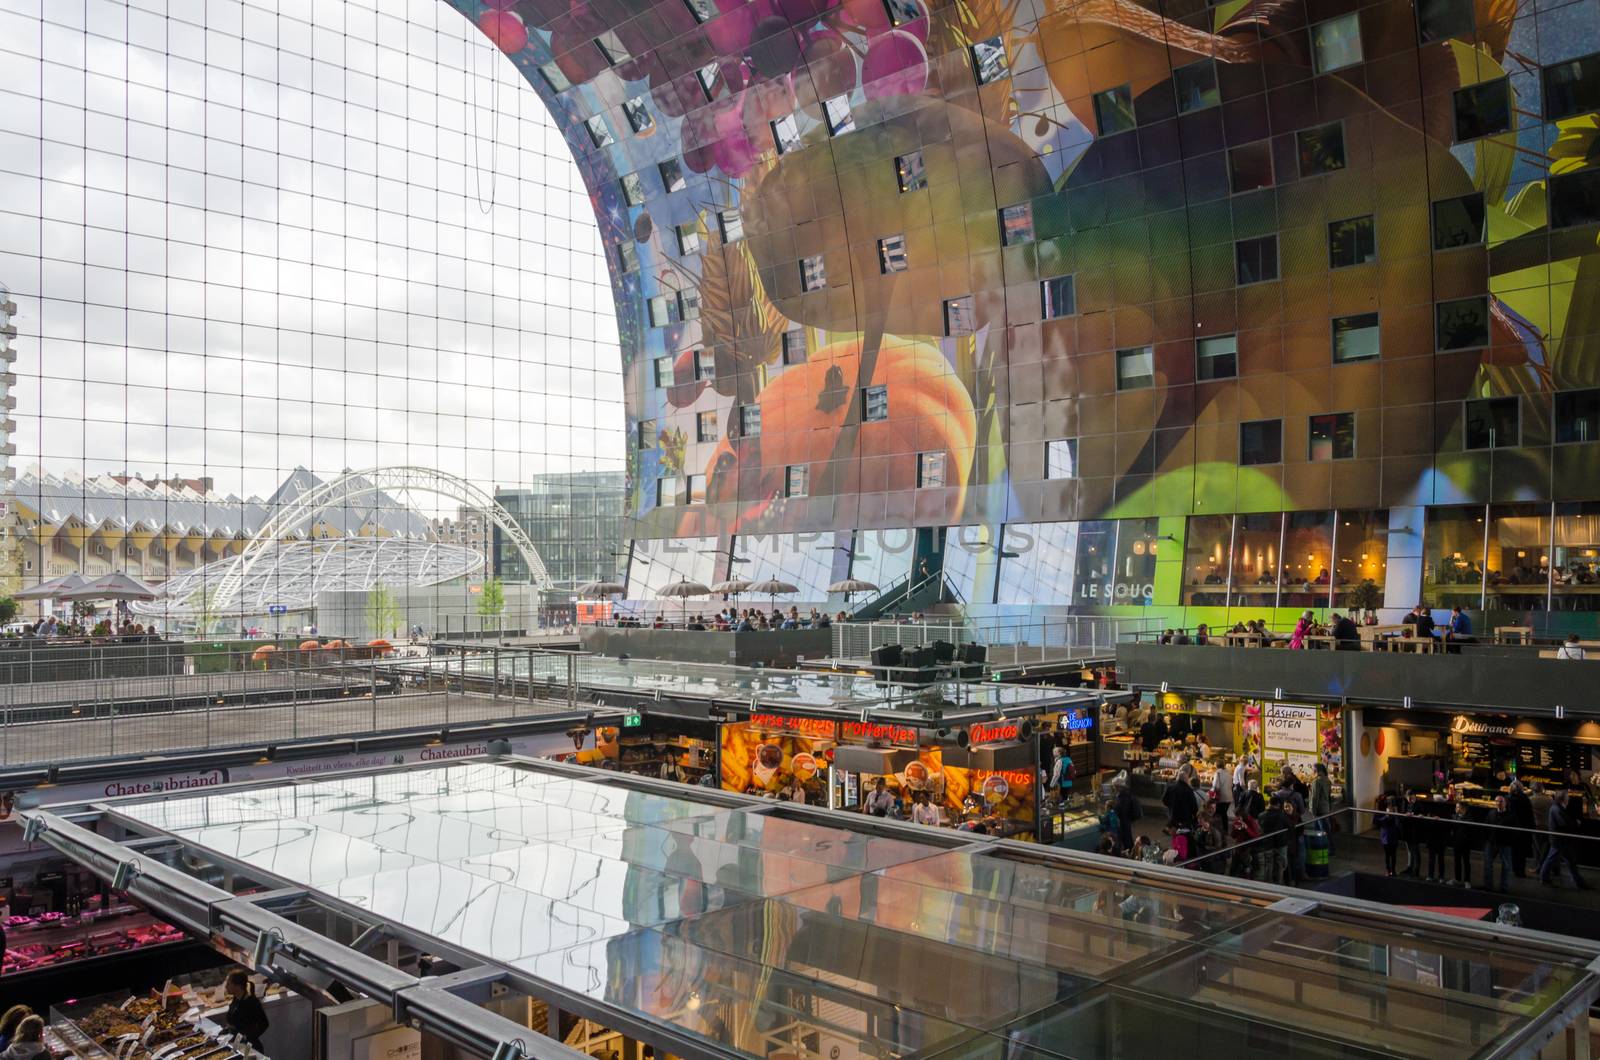 Rotterdam, Netherlands - May 9, 2015: People shopping in Markthal (Market hall) a new icon in Rotterdam. The covered food market and housing development shaped like a giant arch by Dutch architects MVRDV.